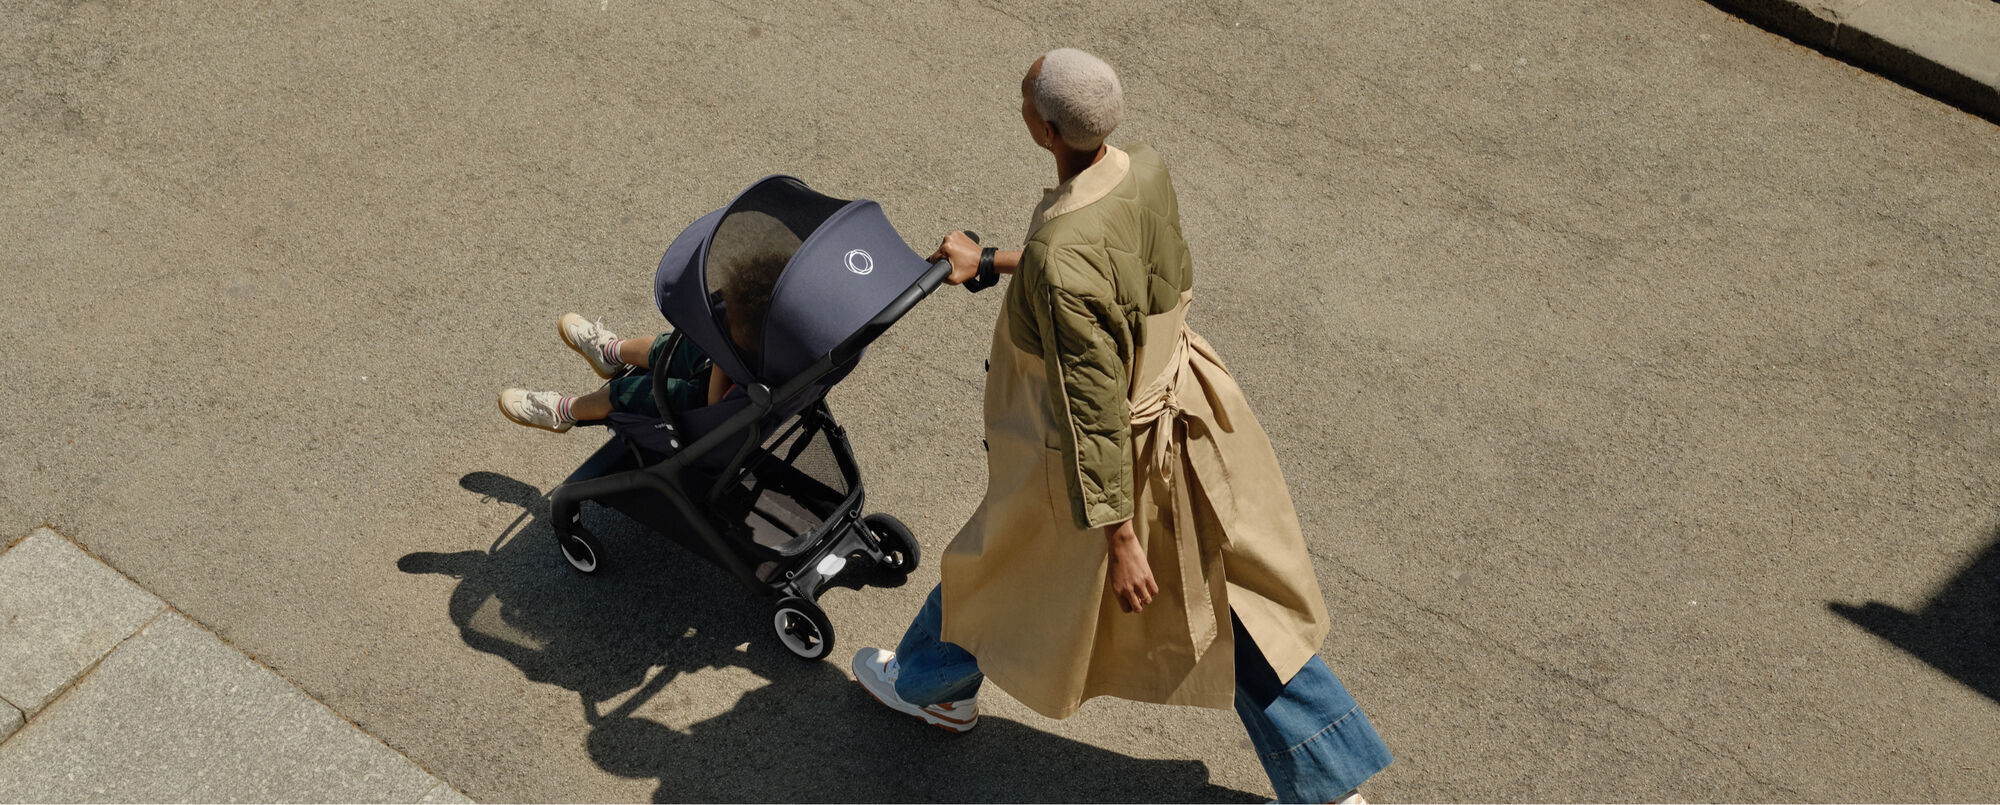 A stylish mom pushing a Bugaboo stroller on the street.	 	 	